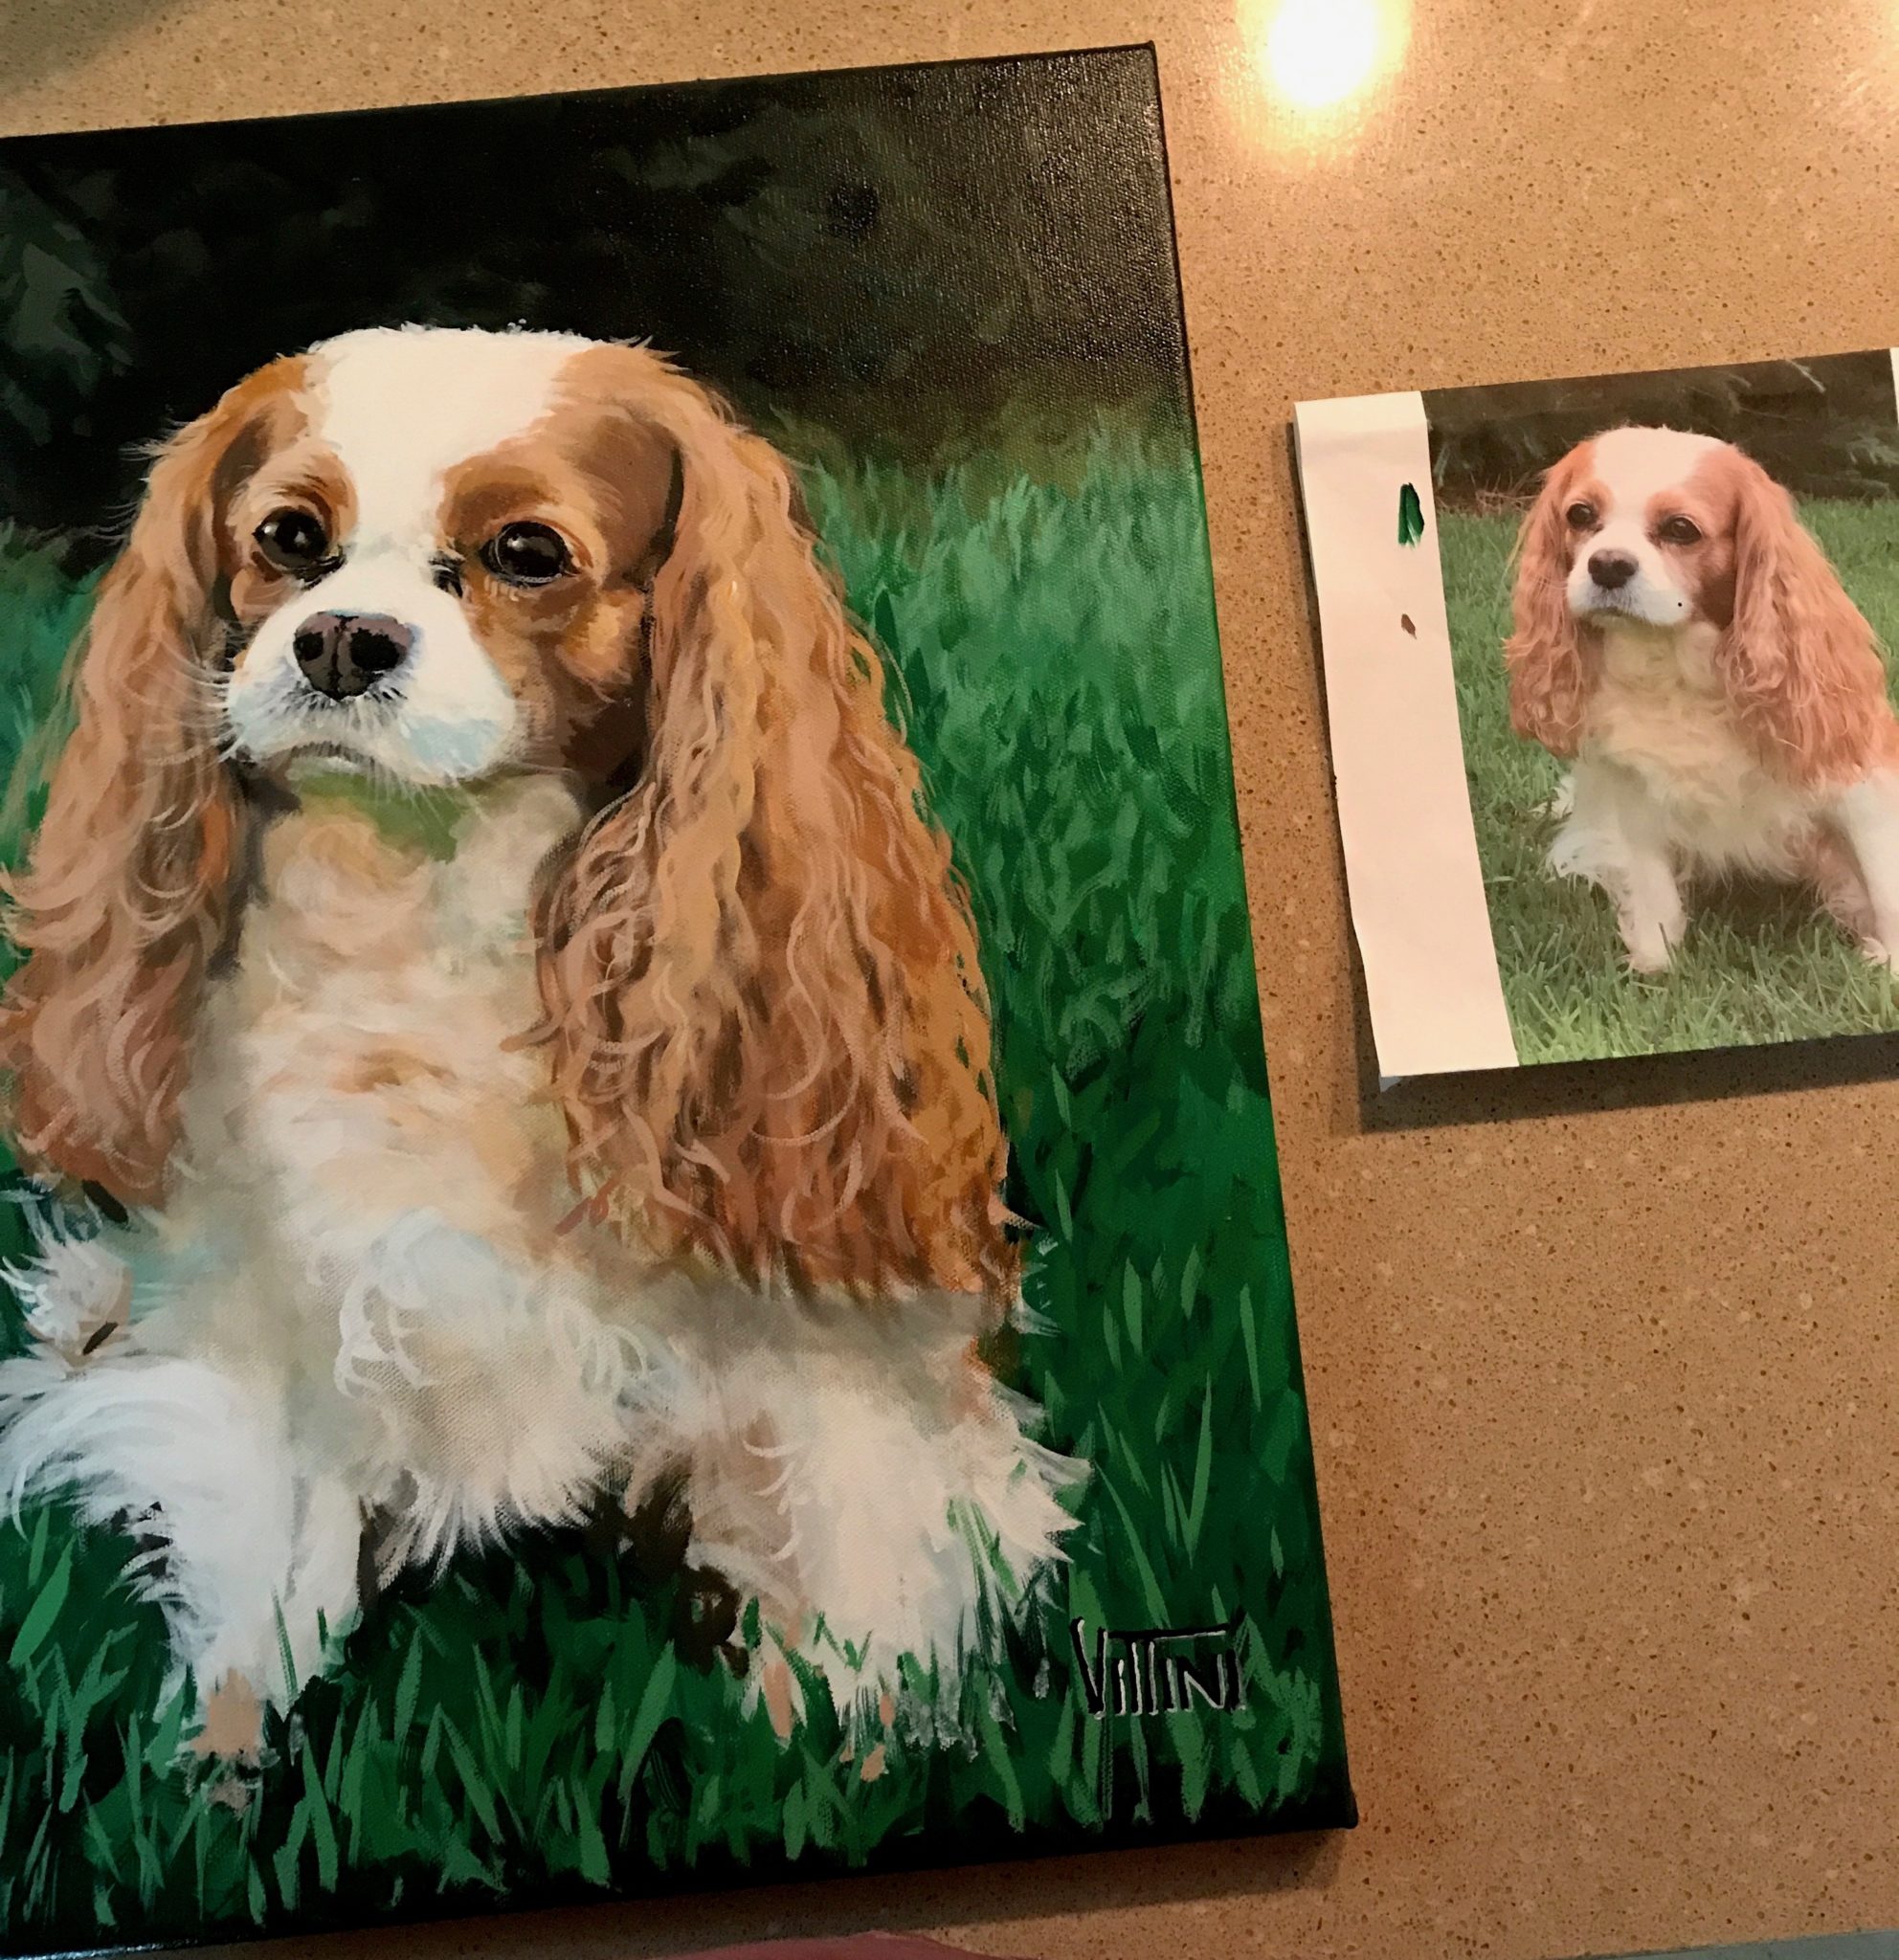 A Photograph of a dog sits next to a freshly painted portrait.